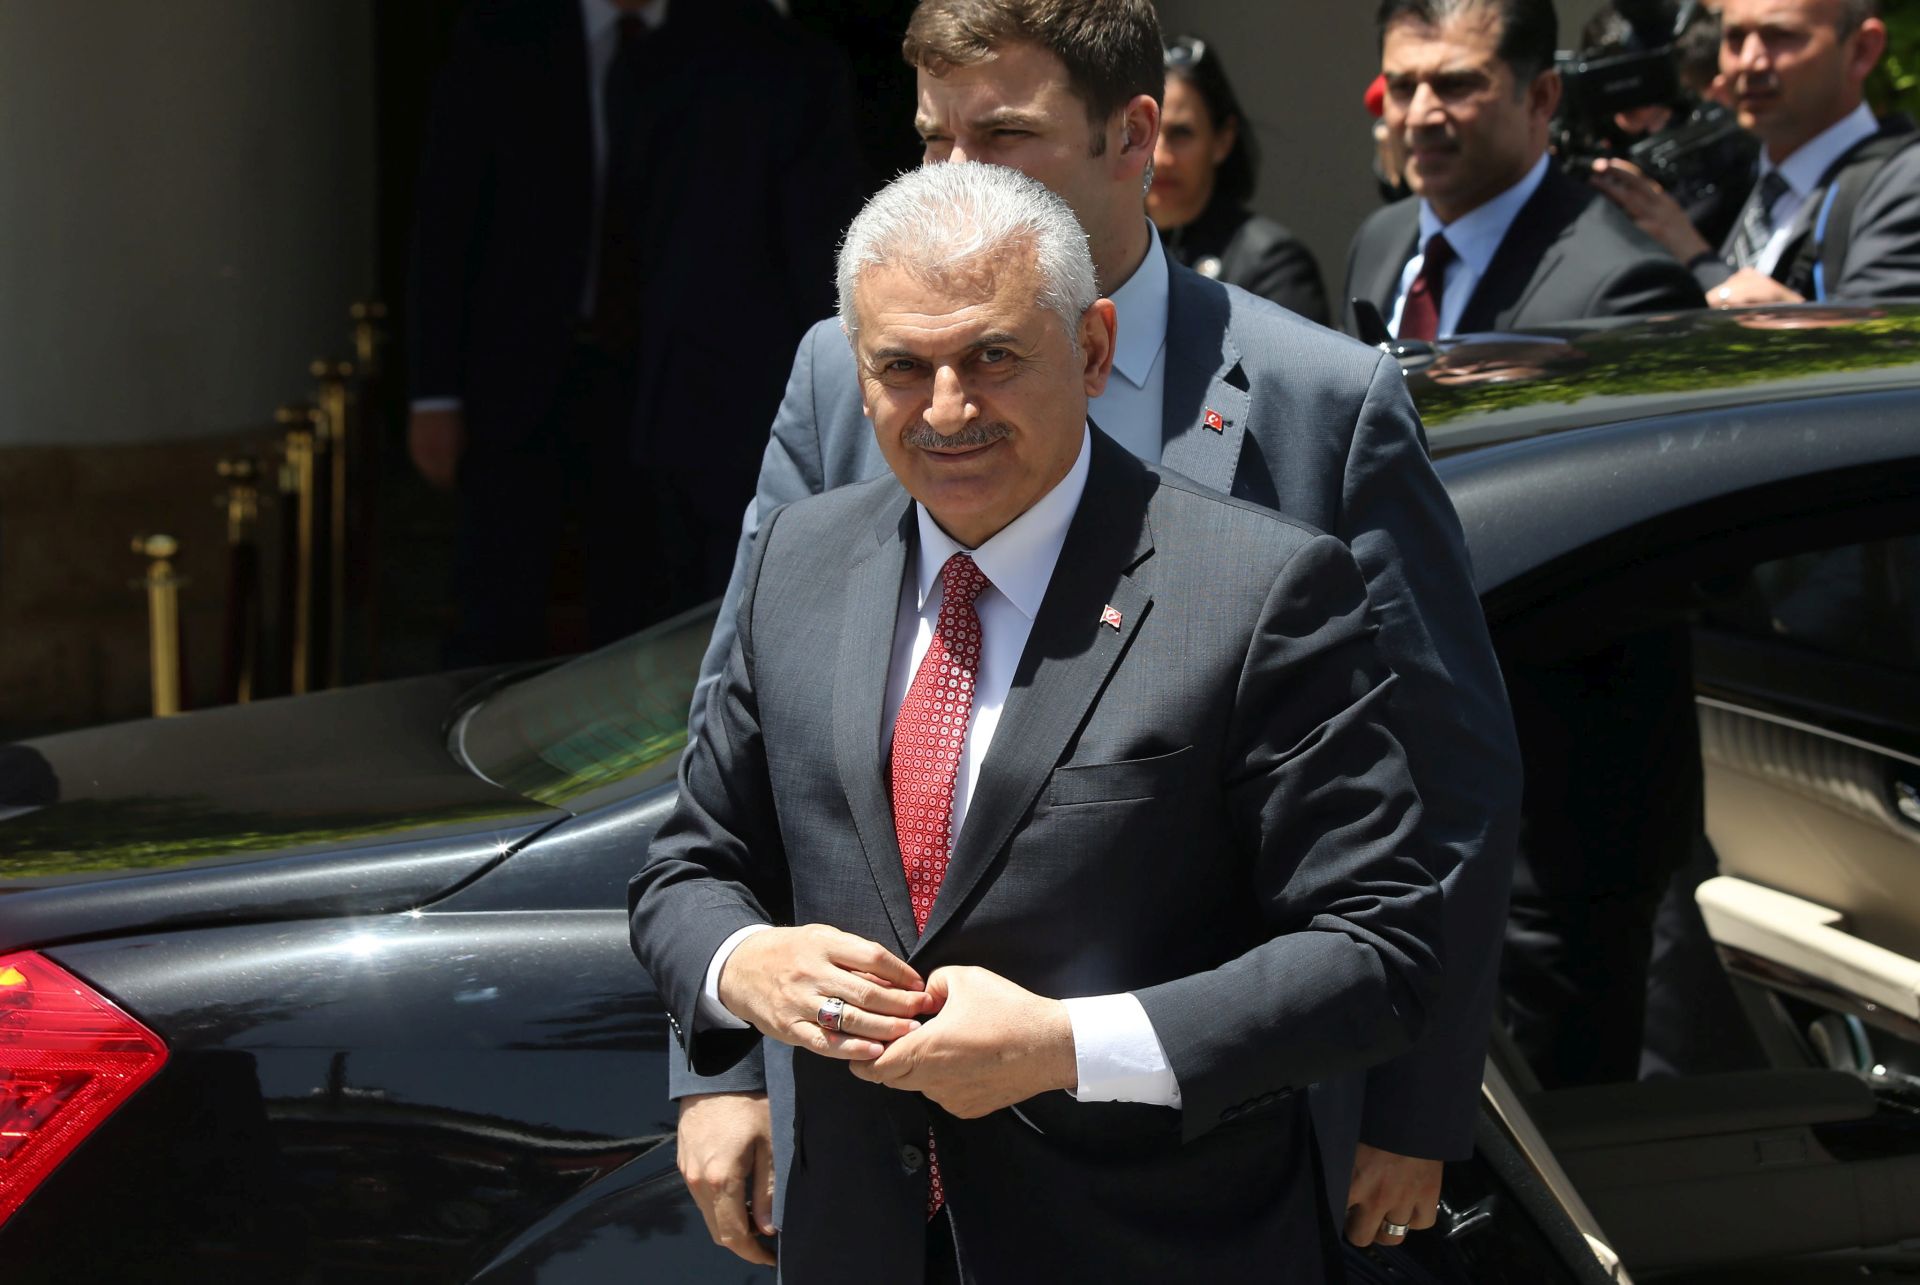 epa05339881 New Turkish Prime Minister Binali Yildirim arrives for talks with Turkish-Cypriot leader Mustafa Akinci (Not Pictured) in the Turkish occupied area of Nicosia, Cyprus, 01 June 2016. Binali Yildirim is in Cyprus for his first official trip.  EPA/KATIA CHRISTODOULOU